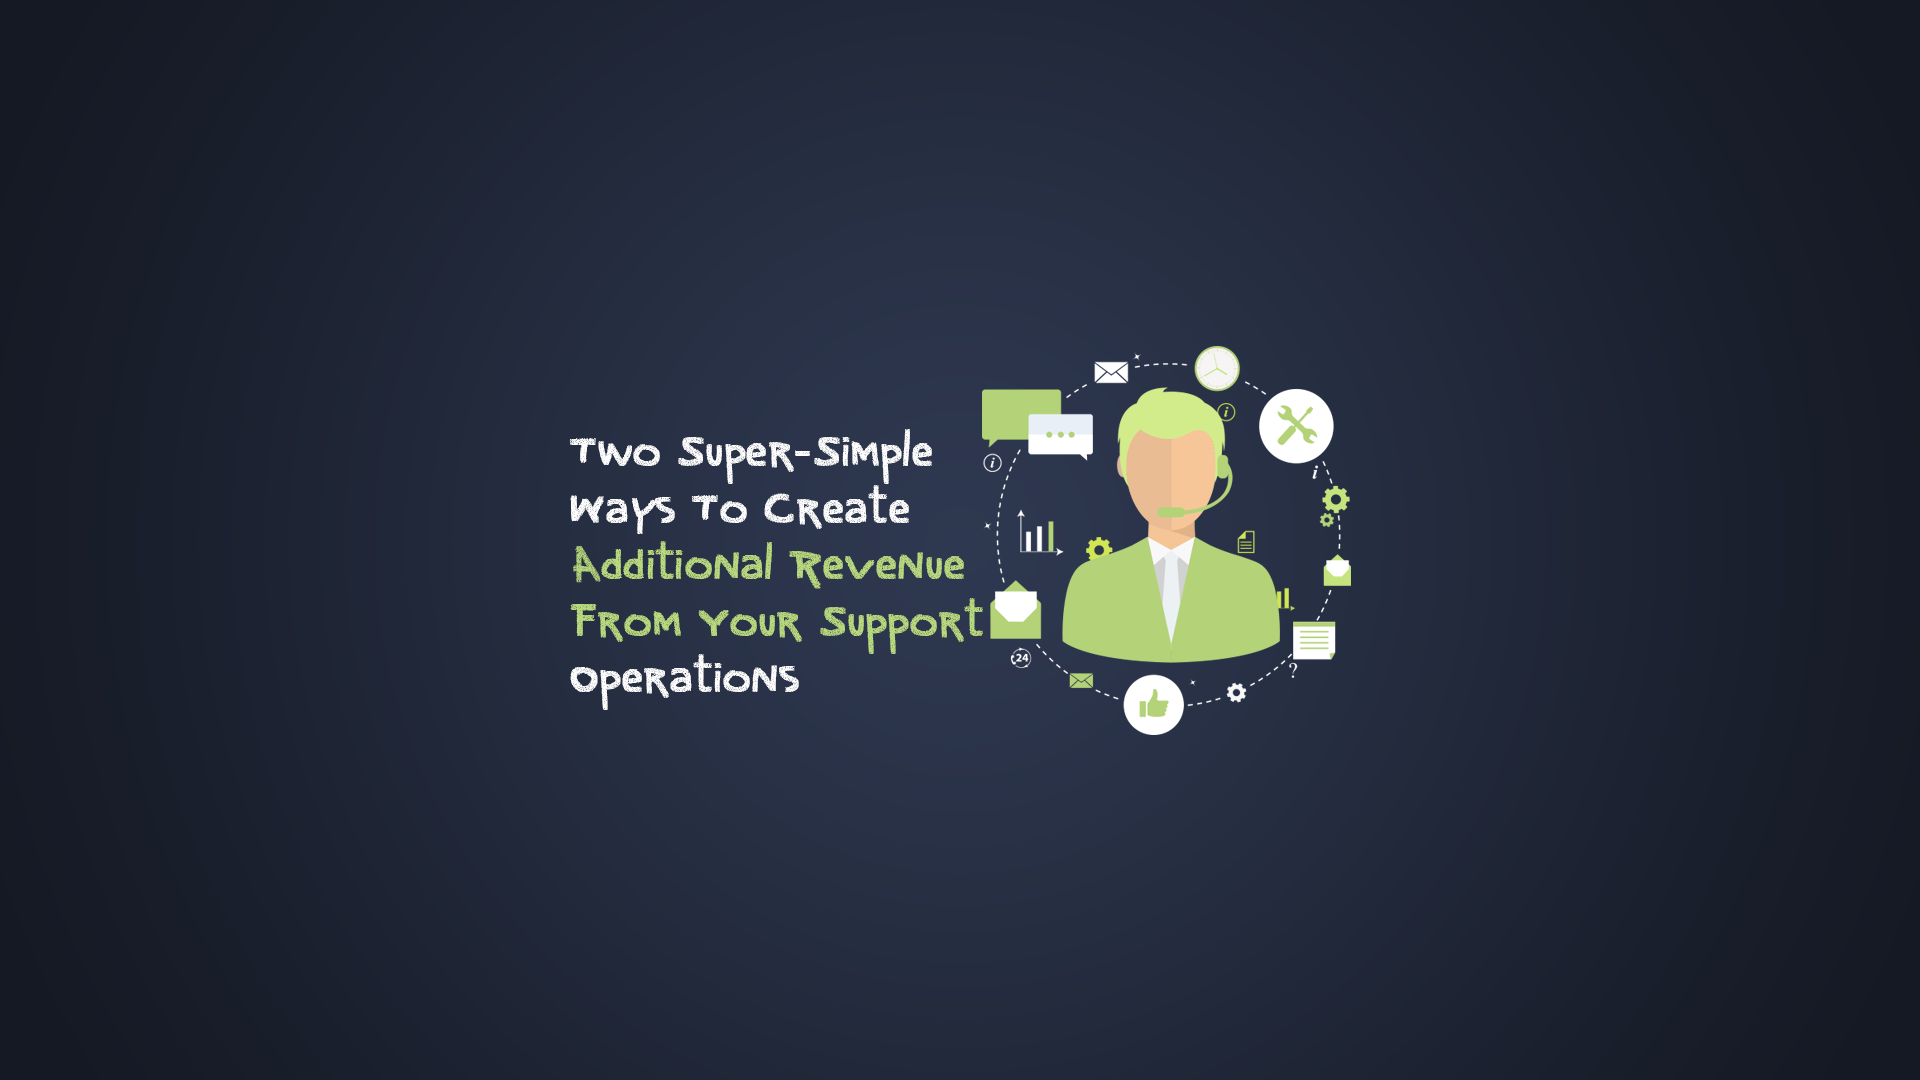 Two Super-Simple Ways To Create Additional Revenue From Your Support Operations